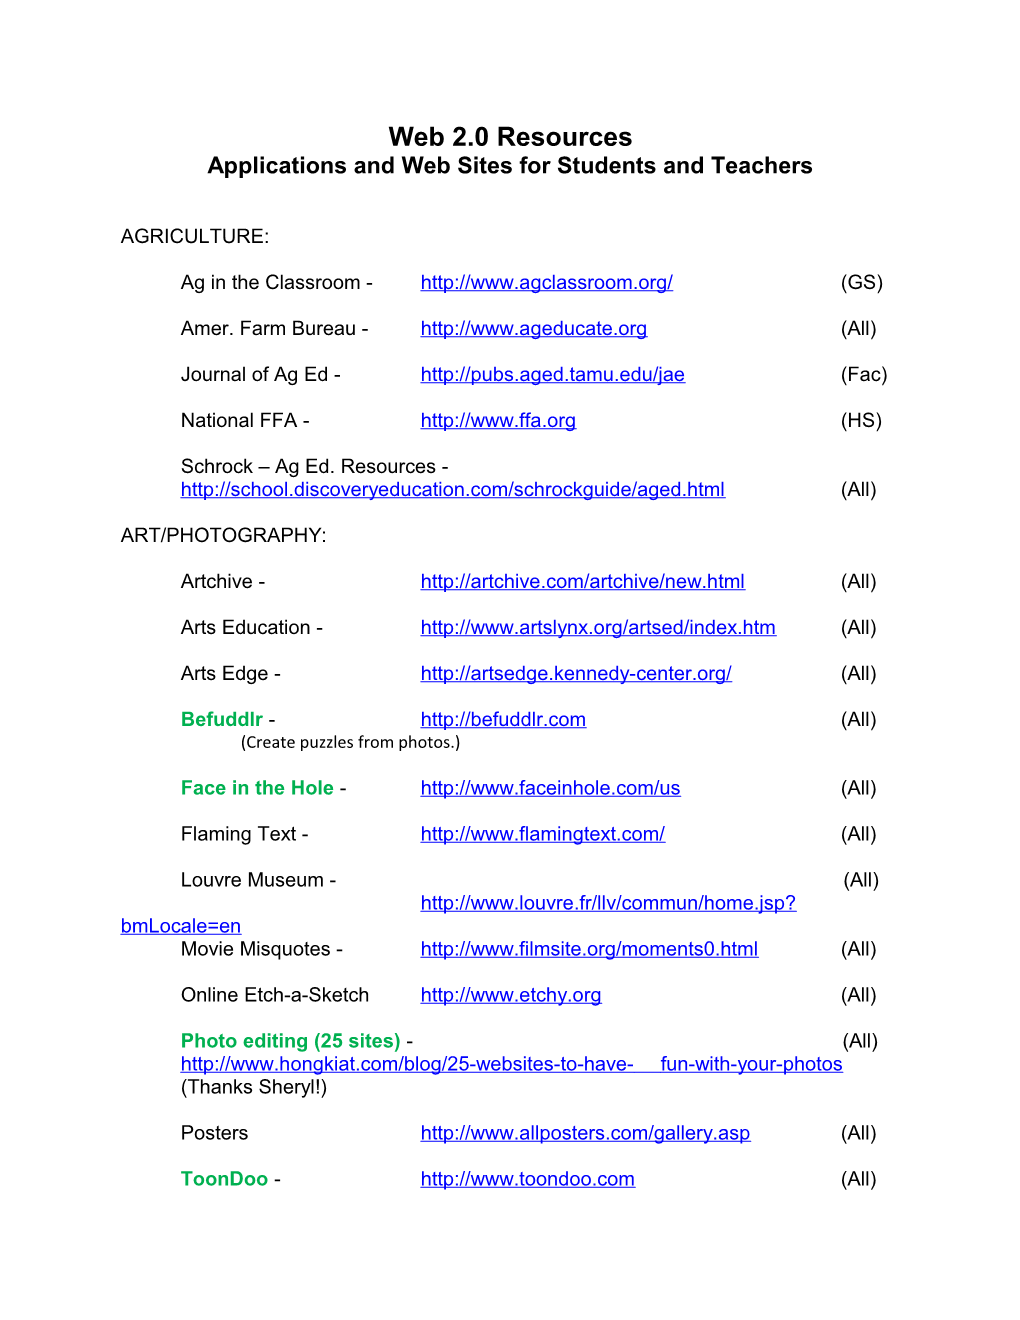 Applications and Web Sites for Students and Teachers